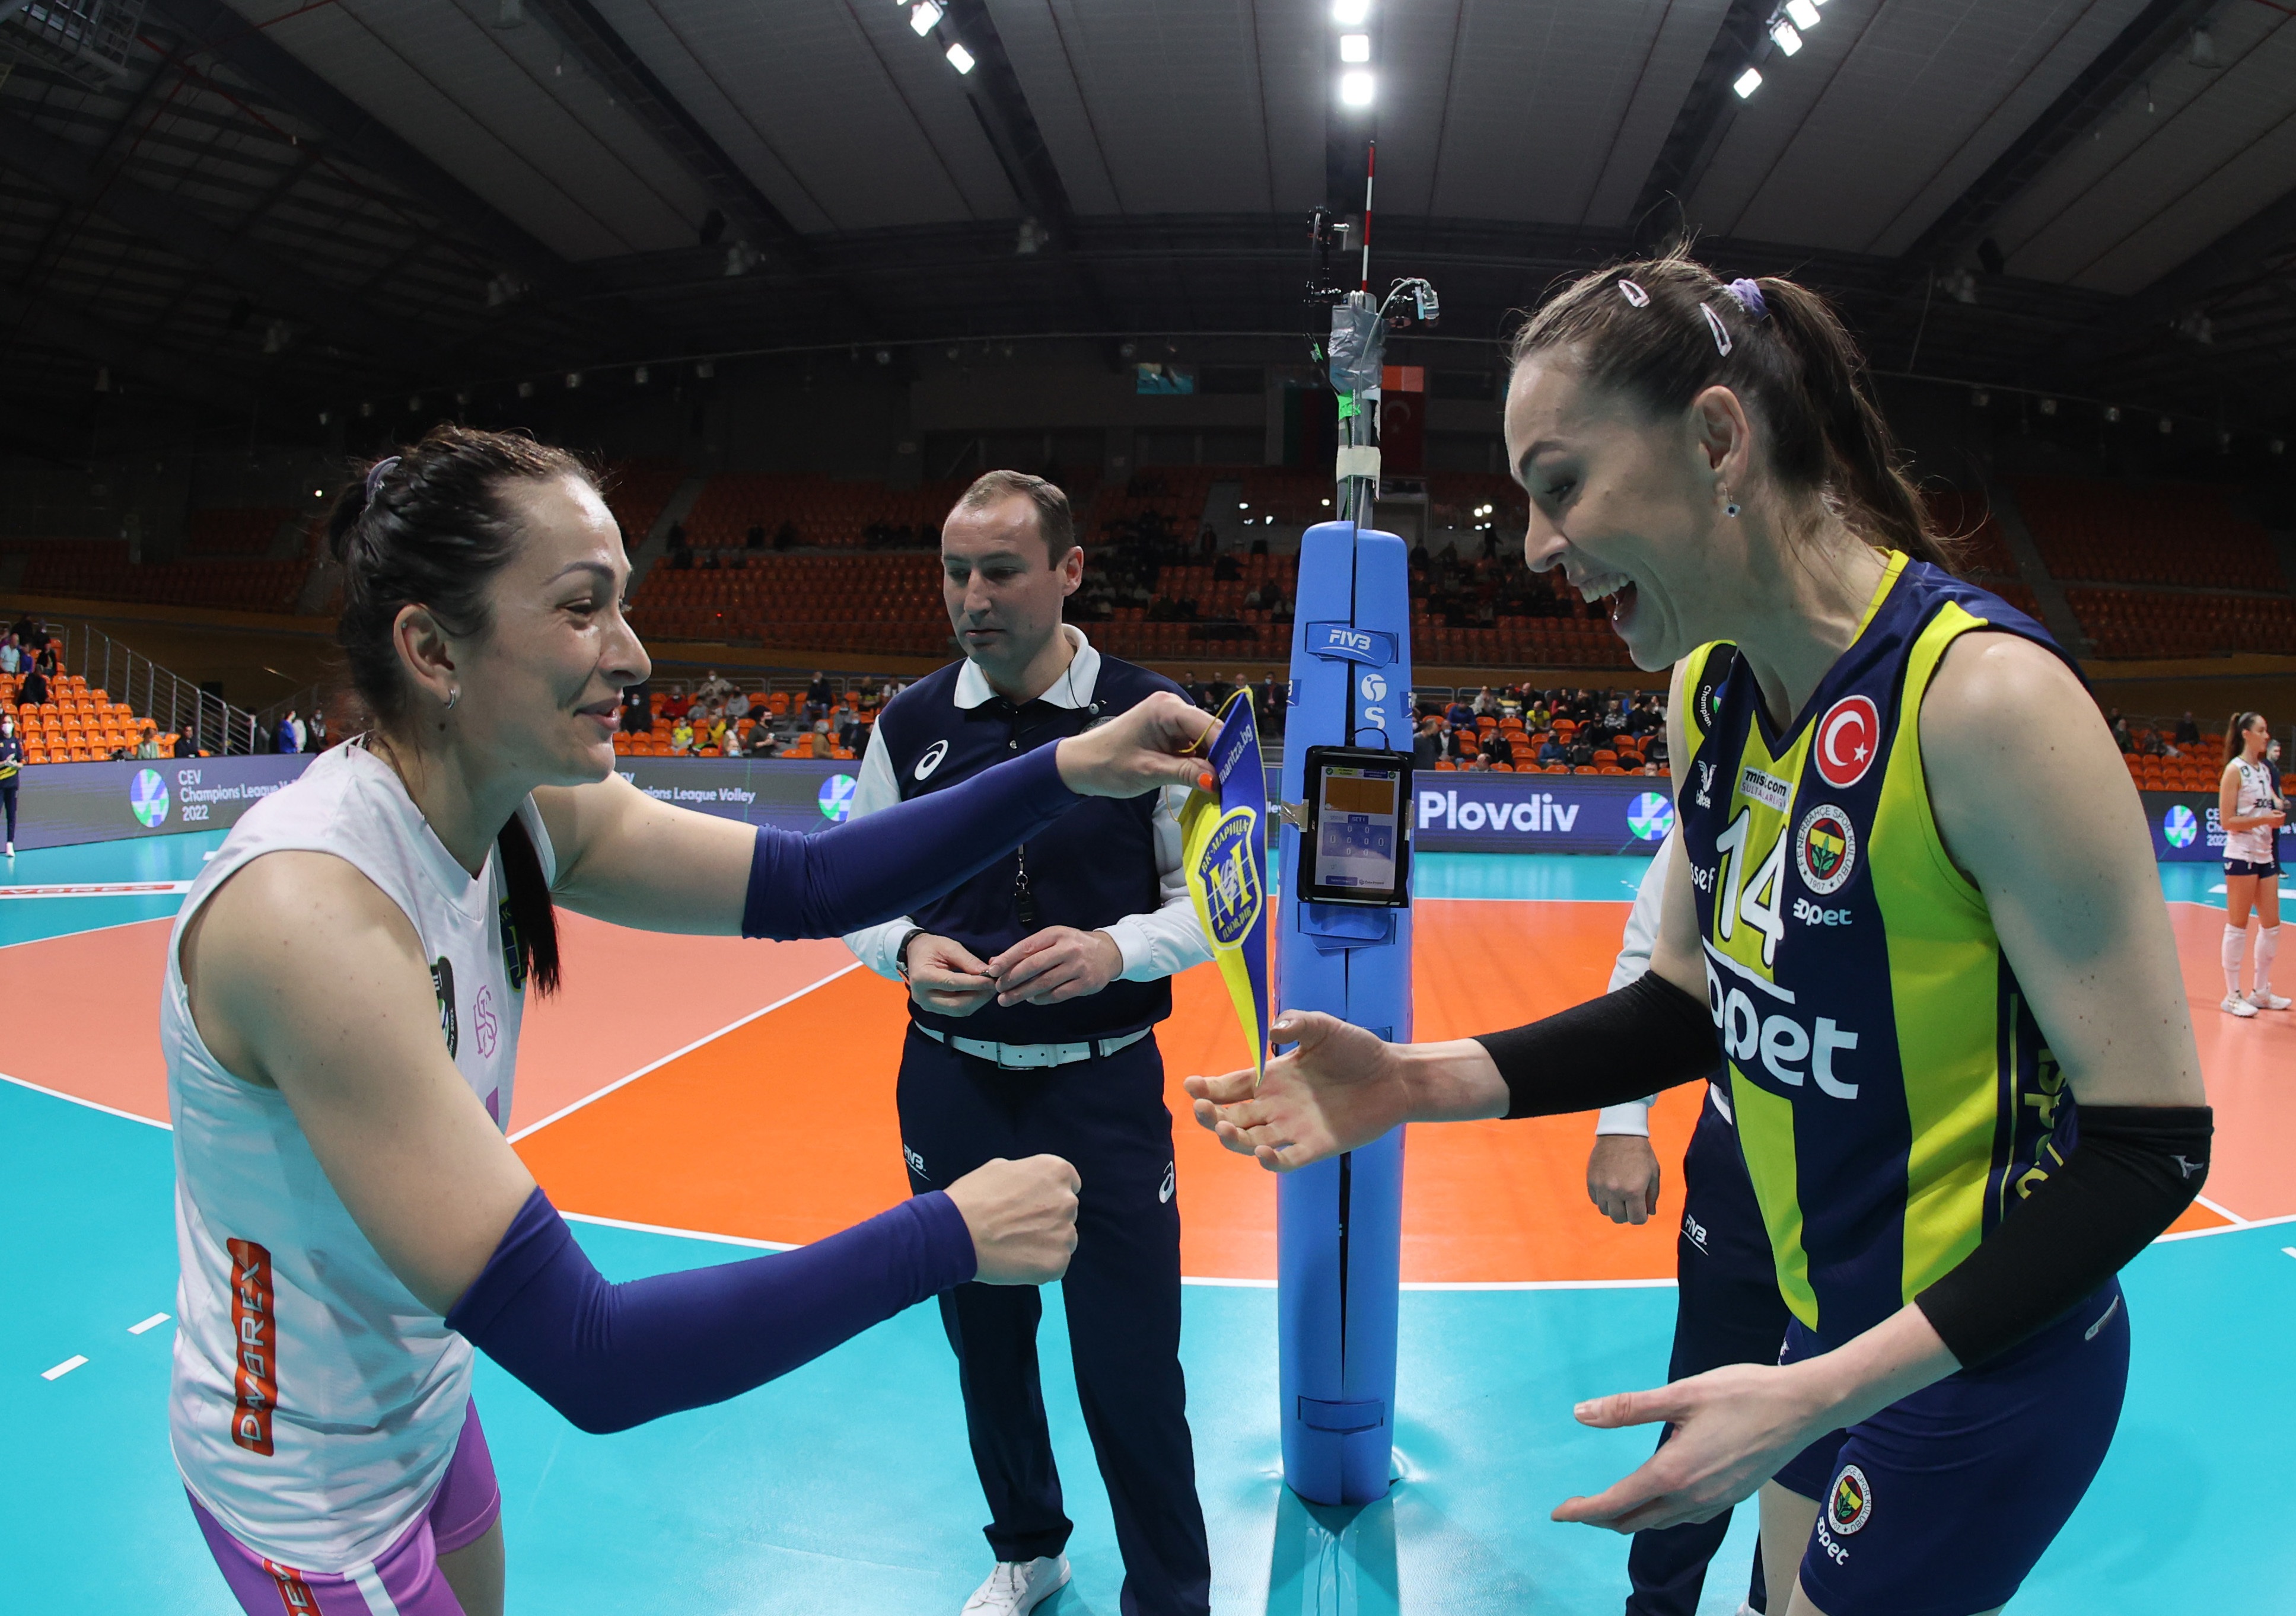 Super Match of the Week live from Istanbul ChampionsLeague